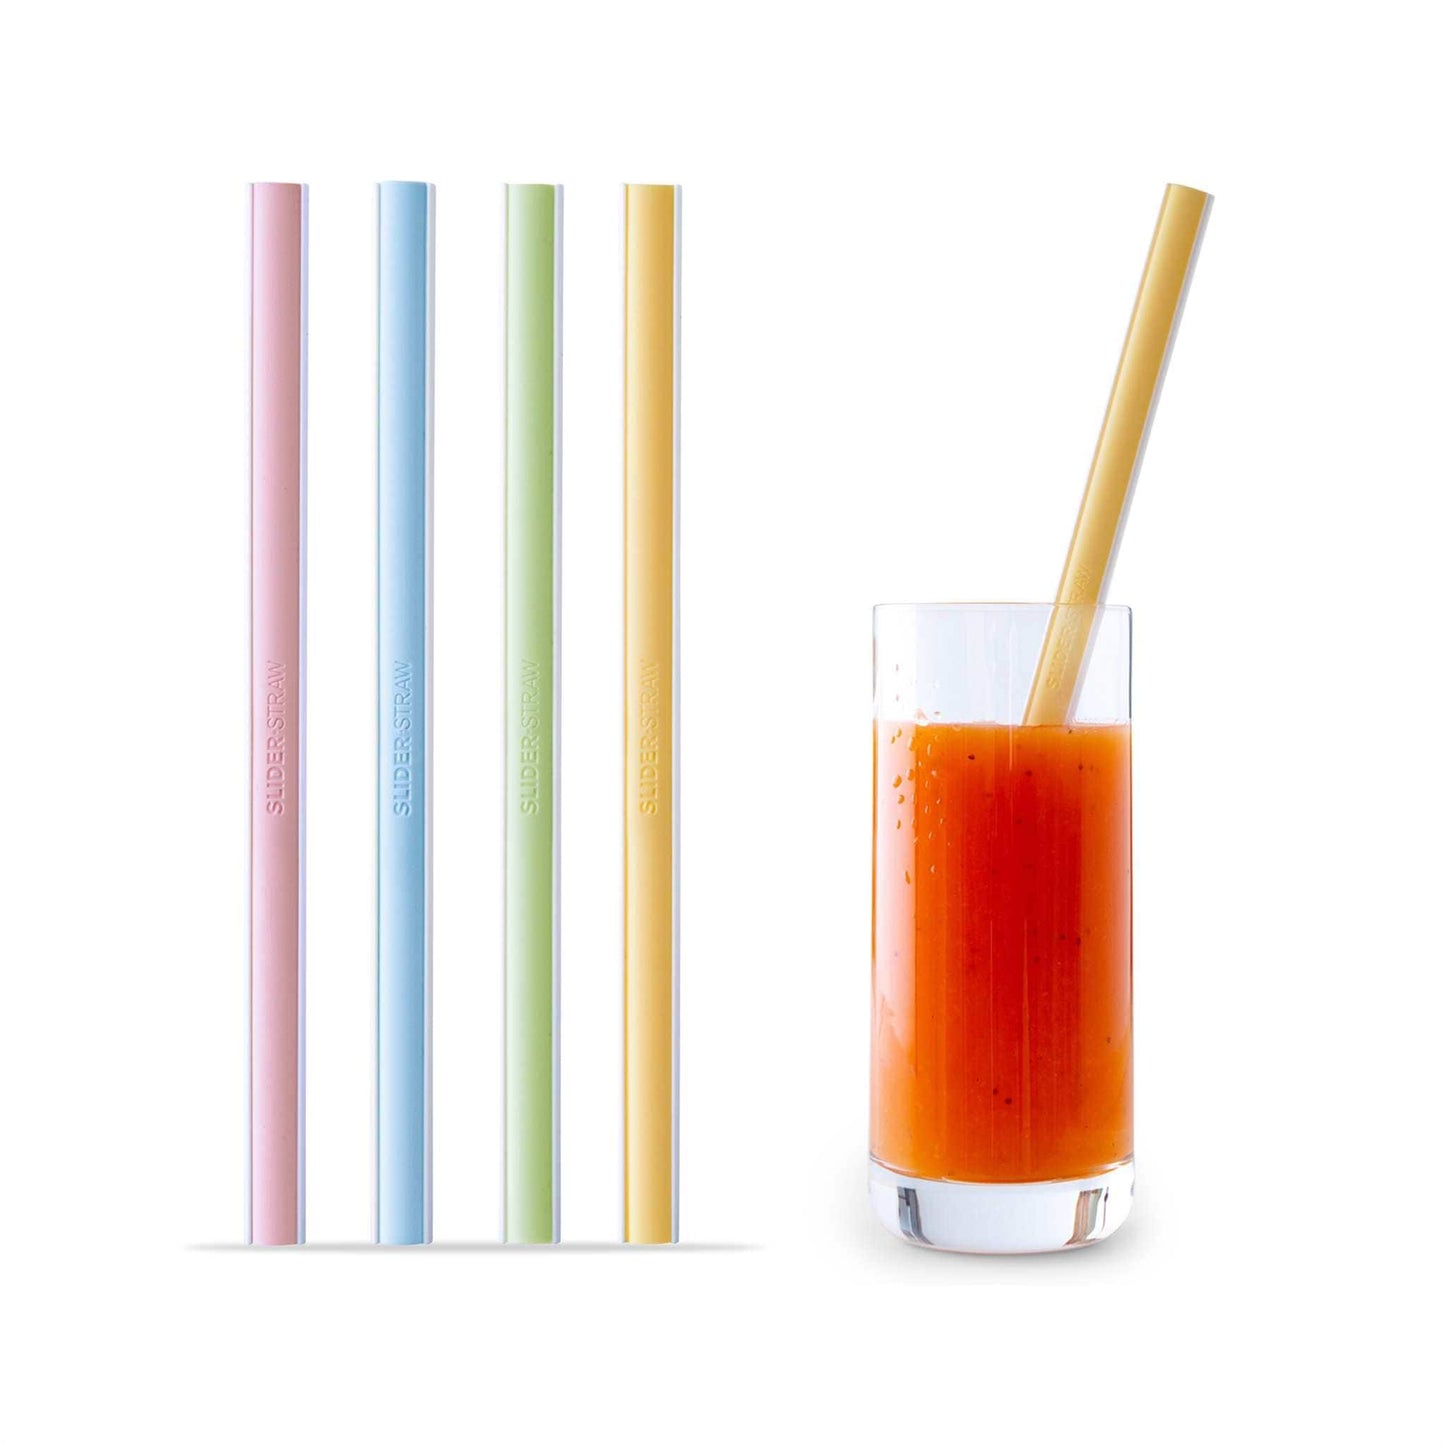 Load image into Gallery viewer, Faerly Straws SliderStraw - The Smart Reusable Drinking Straw - 4 Pack
